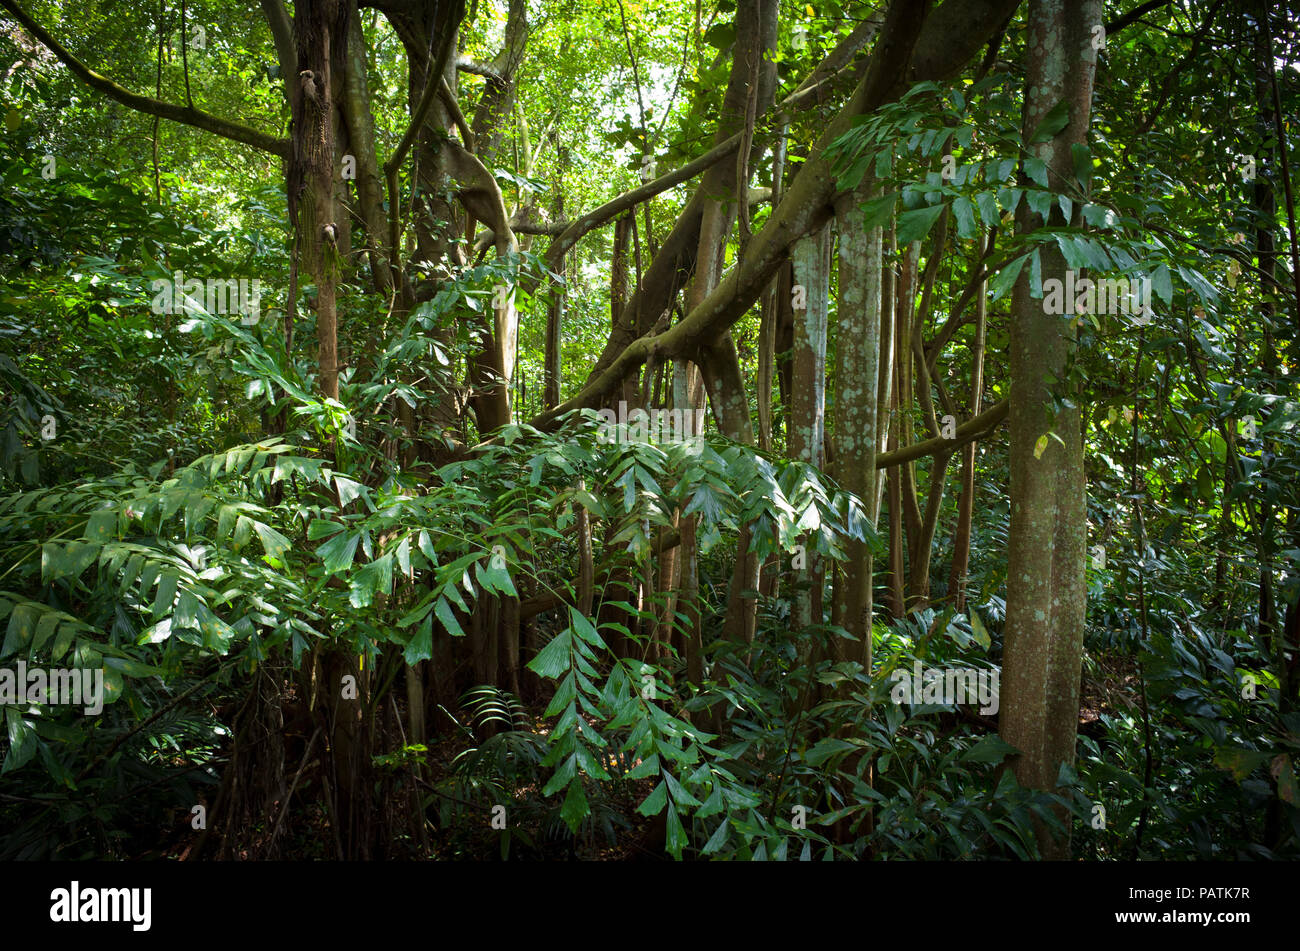 Hanging roots create intricate patterns in the jungle canopy of Sungei Buloh Nature Reserve, Singapore Stock Photo